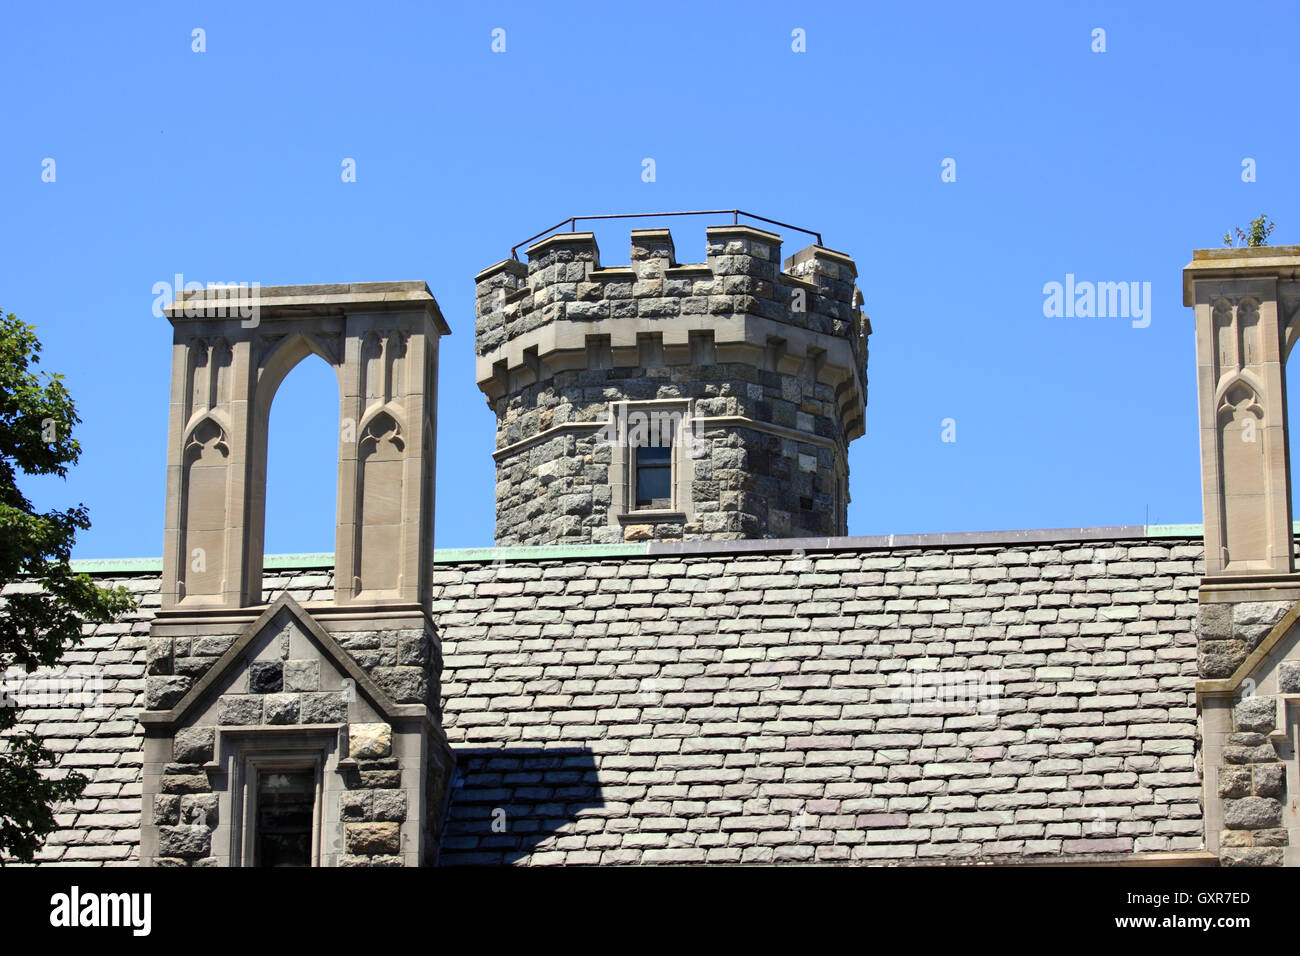 Hempstead House castle and museum Sands Point Preserve Long Island New York Stock Photo